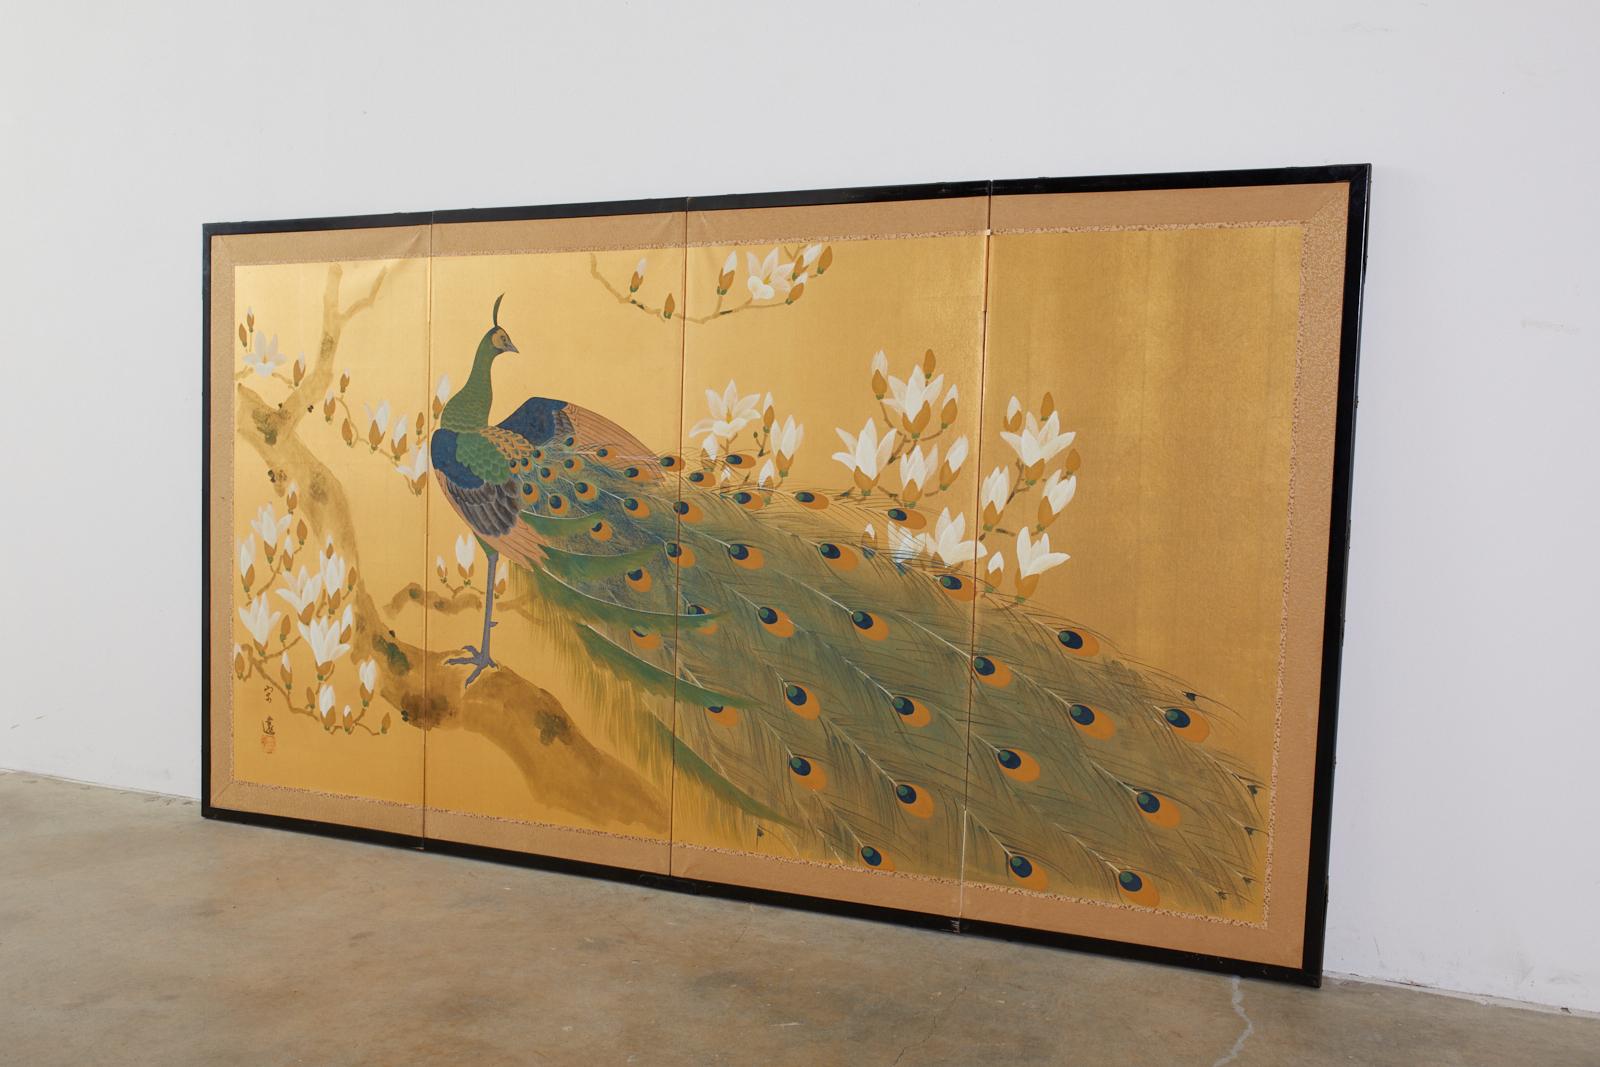 Gorgeous Japanese four-panel byobu screen featuring a peacock perched in a flowering magnolia tree. Made in the Nihonga school style with ink and color pigments on gilt squares. Signed by artist Soen with a seal. Set in a black lacquered wood frame